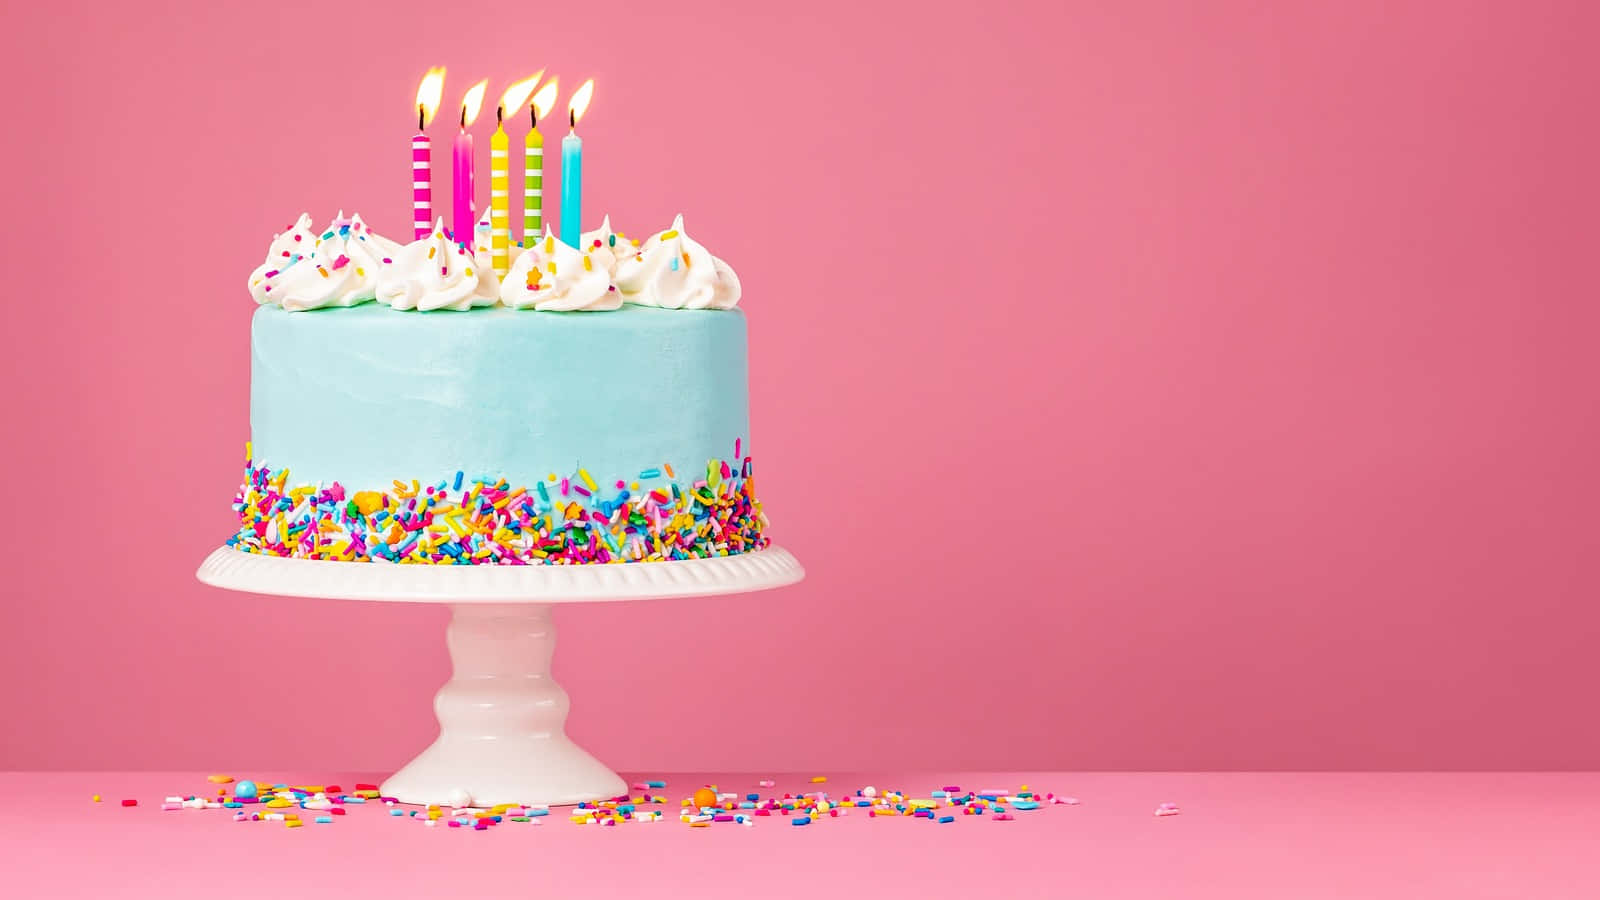 A Festive and Delicious Birthday Cake with Colorful Candles